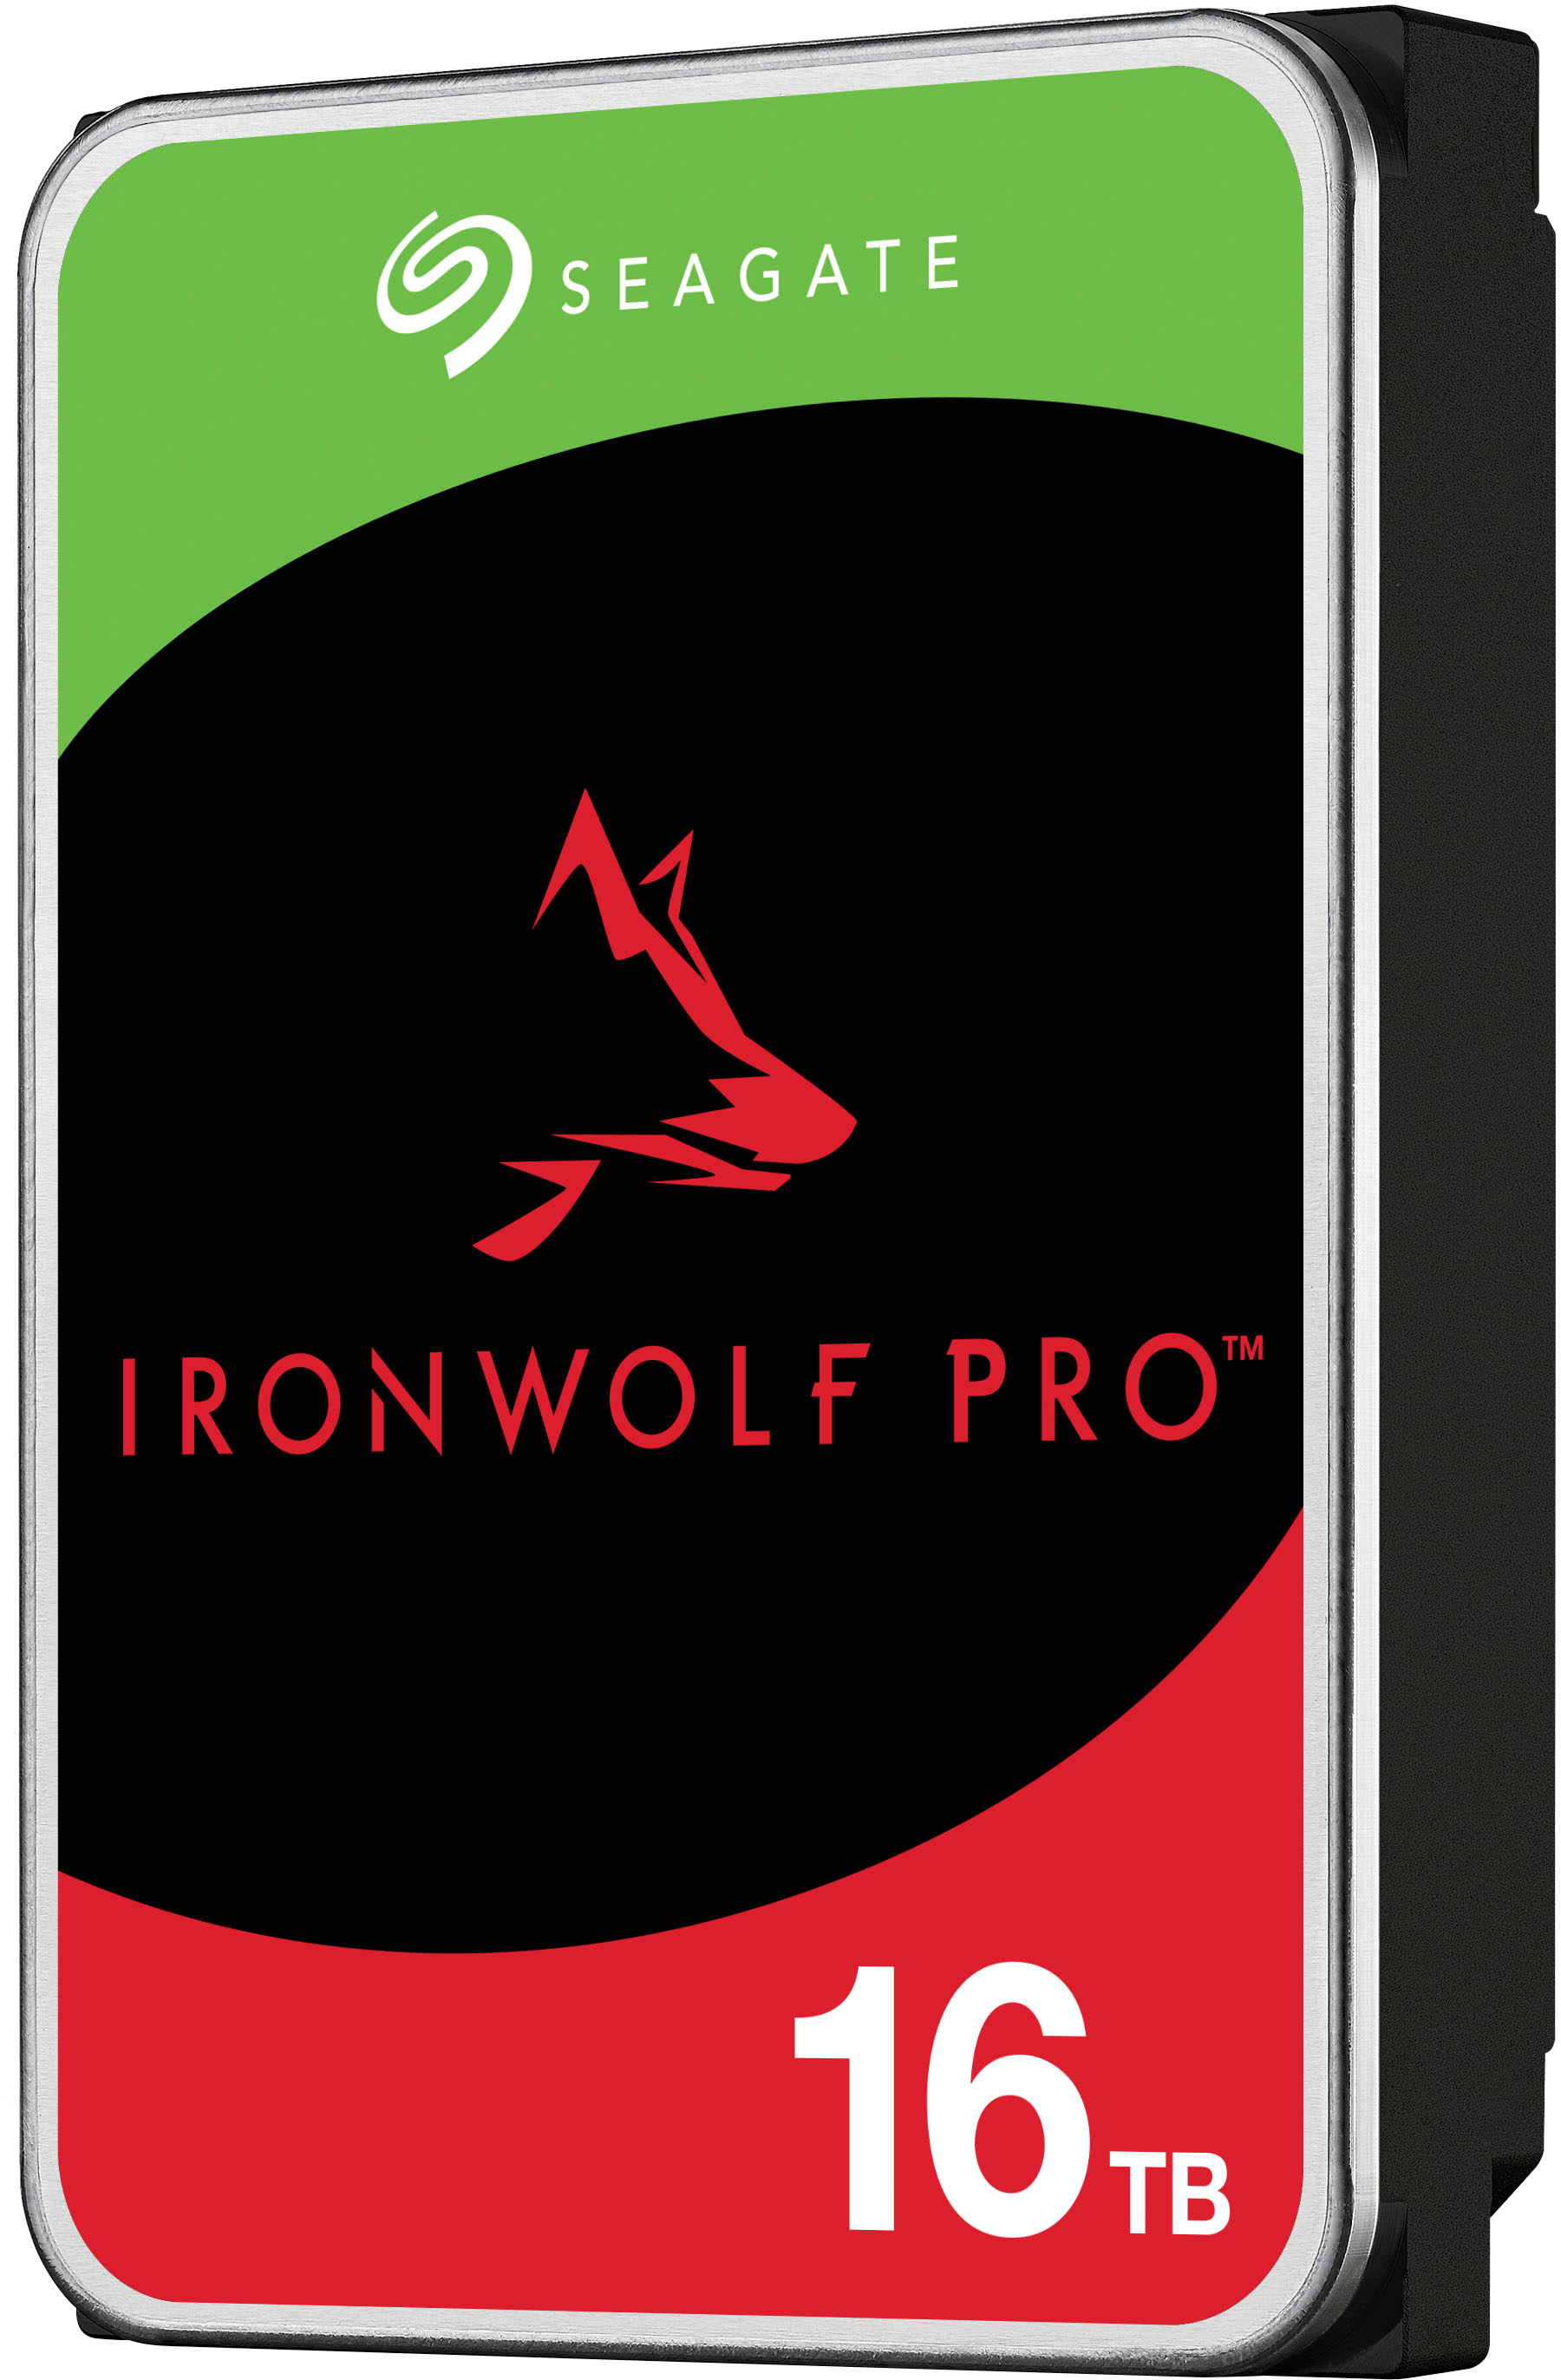 IronWolf Pro  Support Seagate US